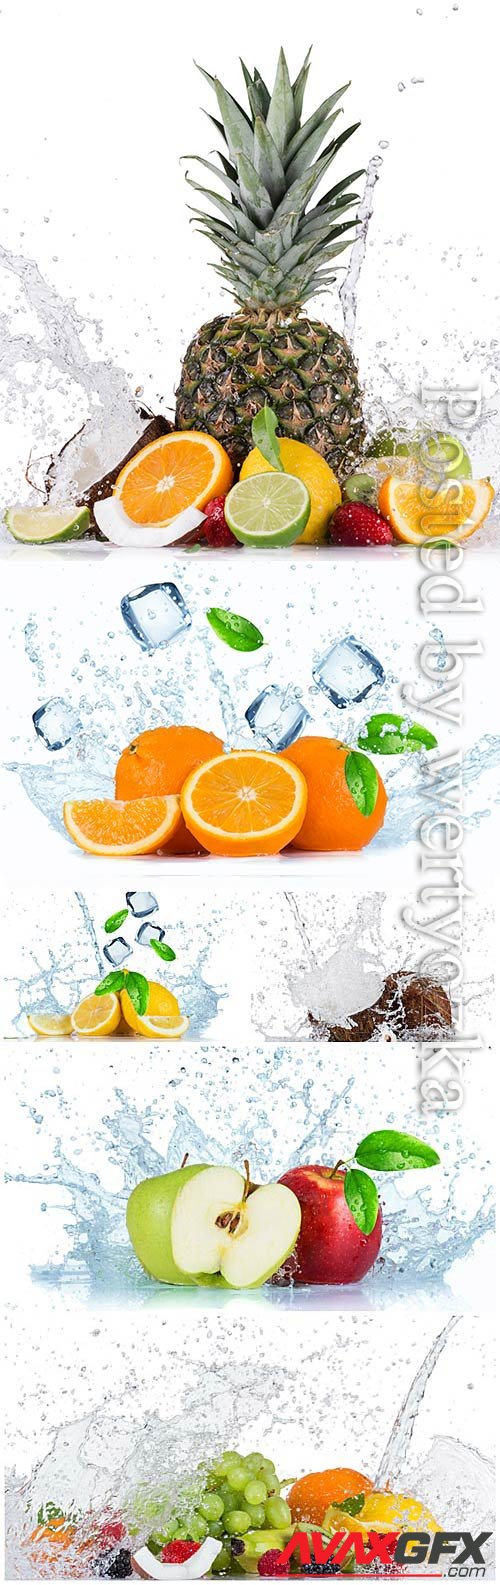 Fruits and berries with slices of lbda and splashing water stock photo